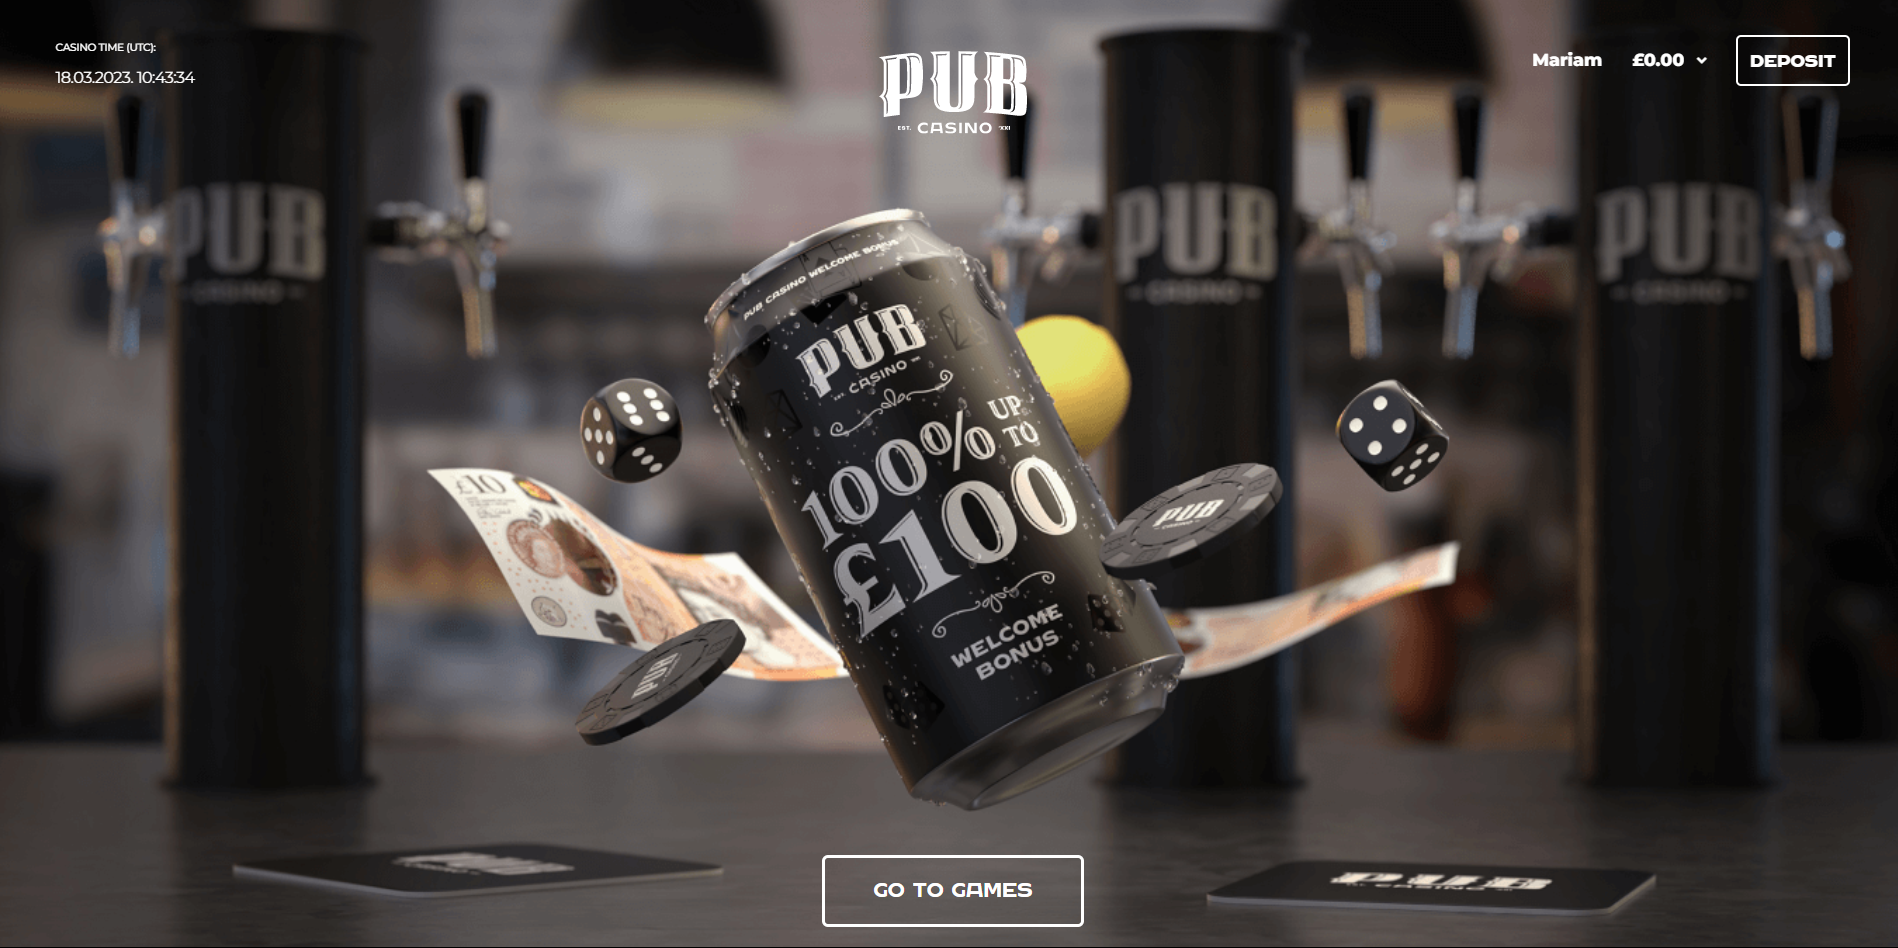 PubCasino welcome offer.